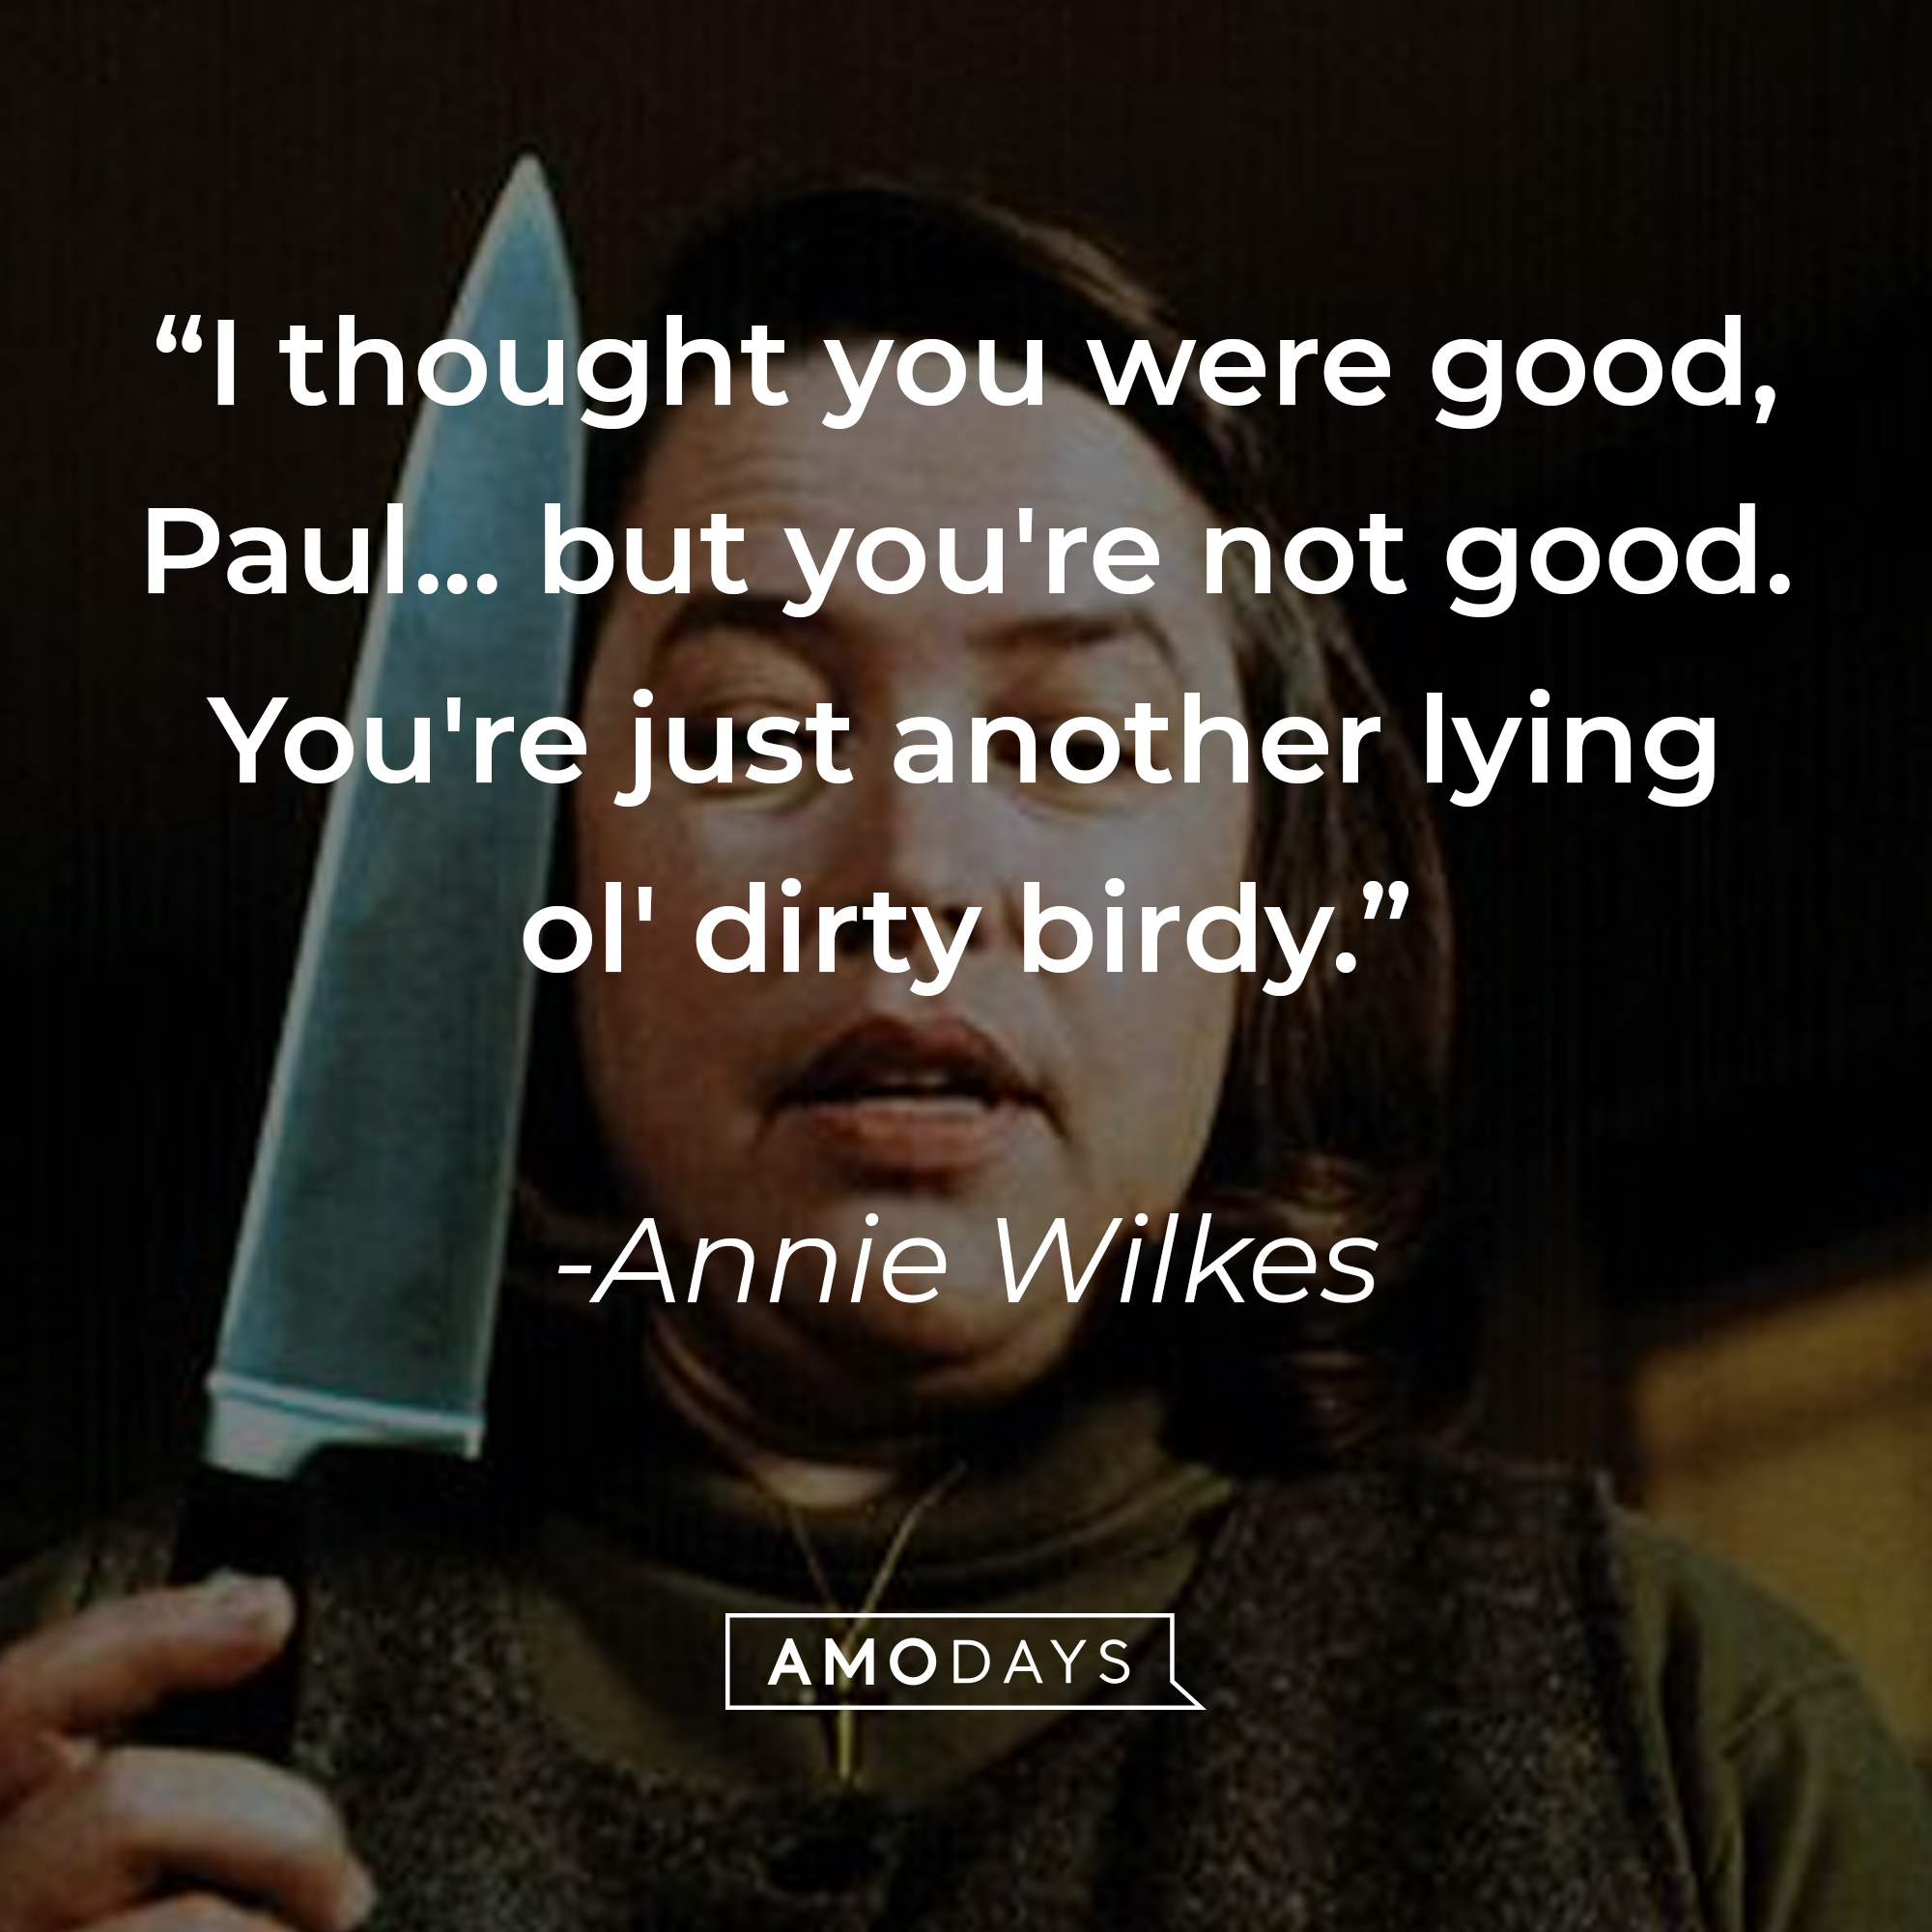 Annie Wilkes' quote: “I thought you were good, Paul... but you're not good. You're just another lying ol' dirty birdy.” | Source: facebook.com/MiseryMovie